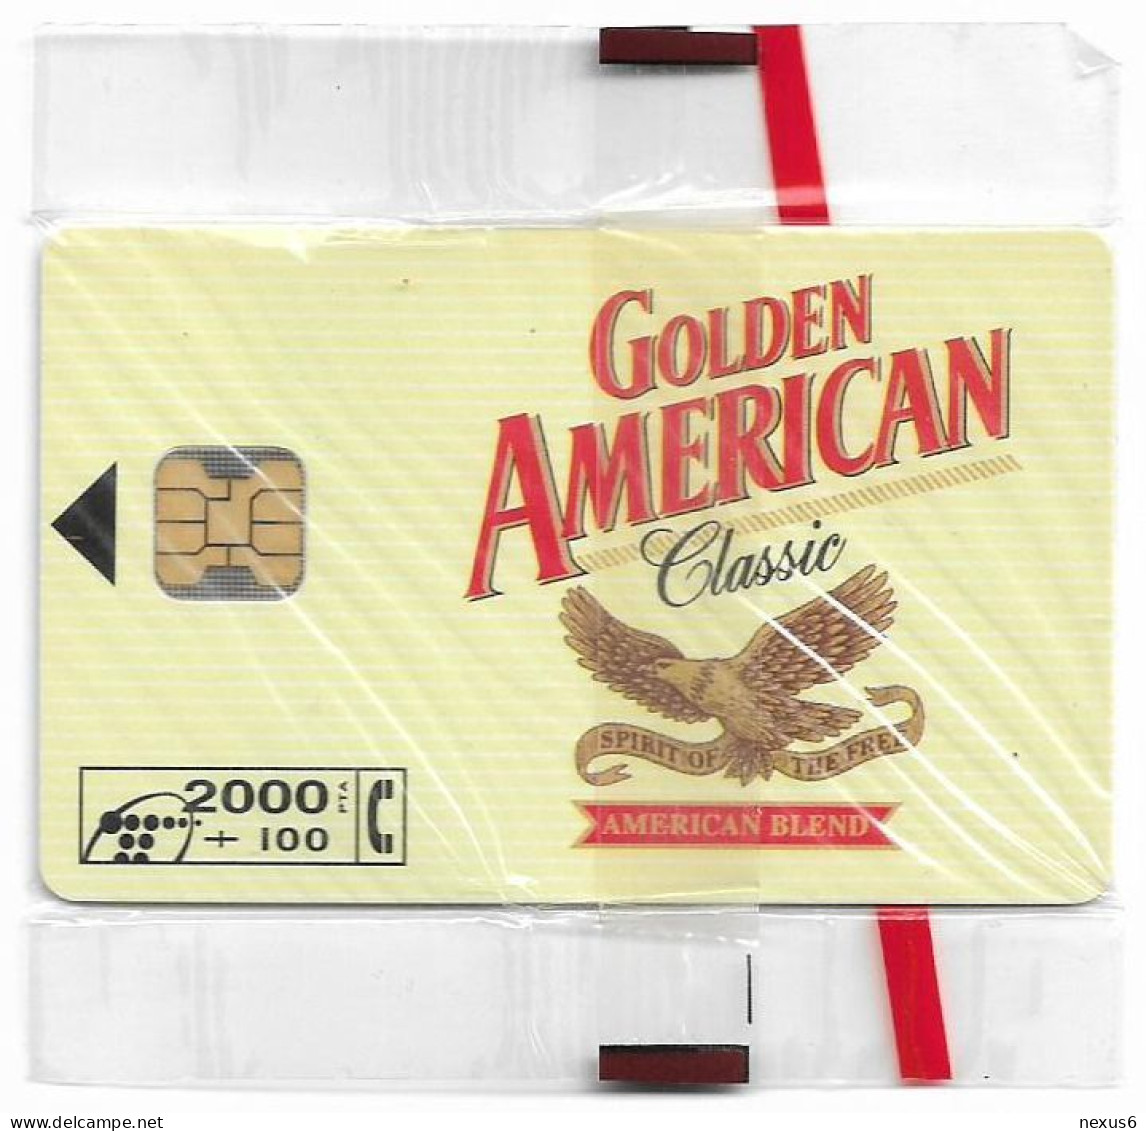 Spain - Telefónica - Tabaco Golden American - P-100 - 11.1994, 2.100PTA, 6.000ex, NSB - Emissions Privées